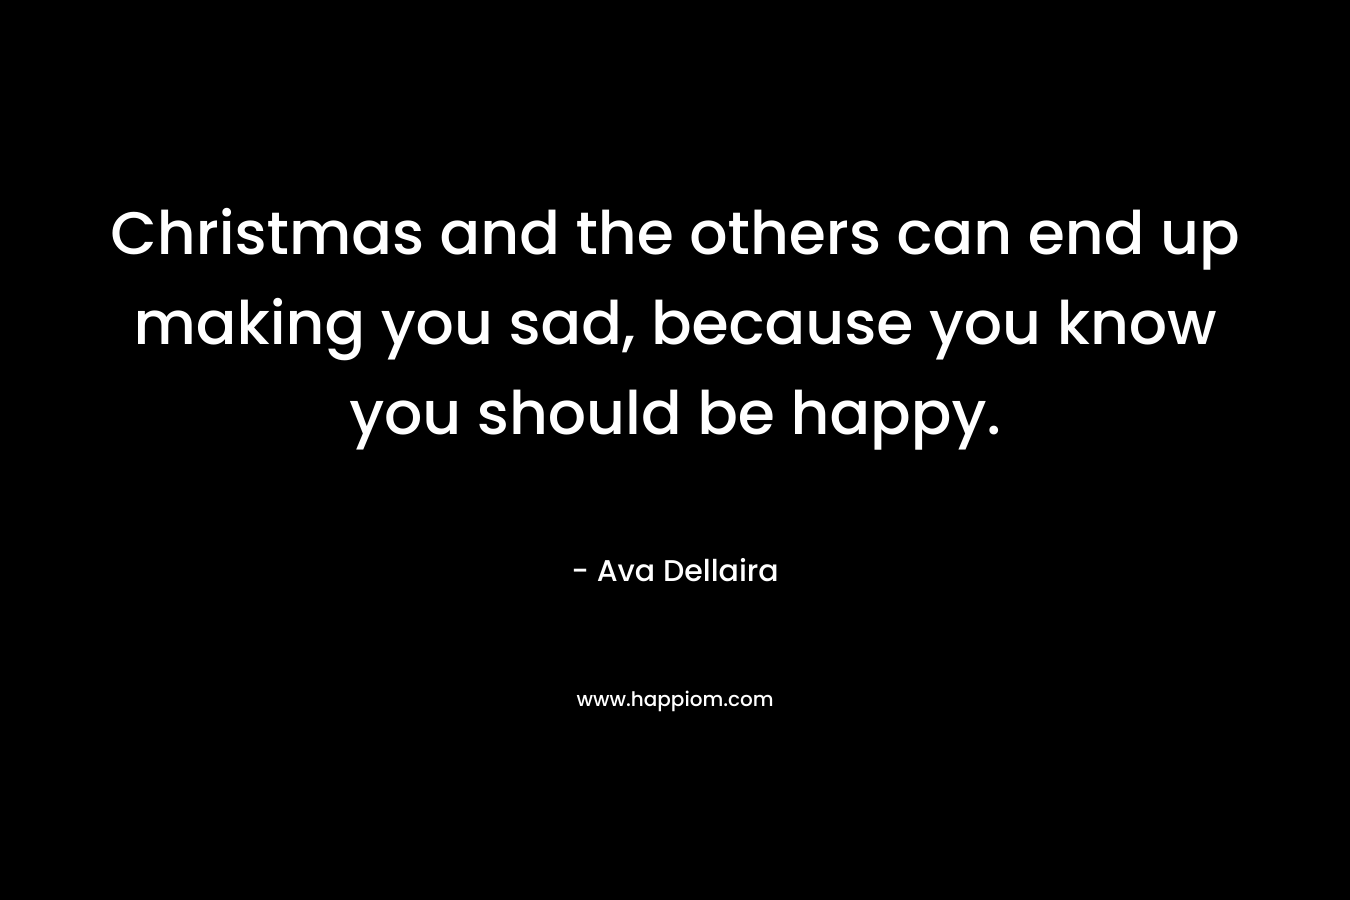 Christmas and the others can end up making you sad, because you know you should be happy. – Ava Dellaira